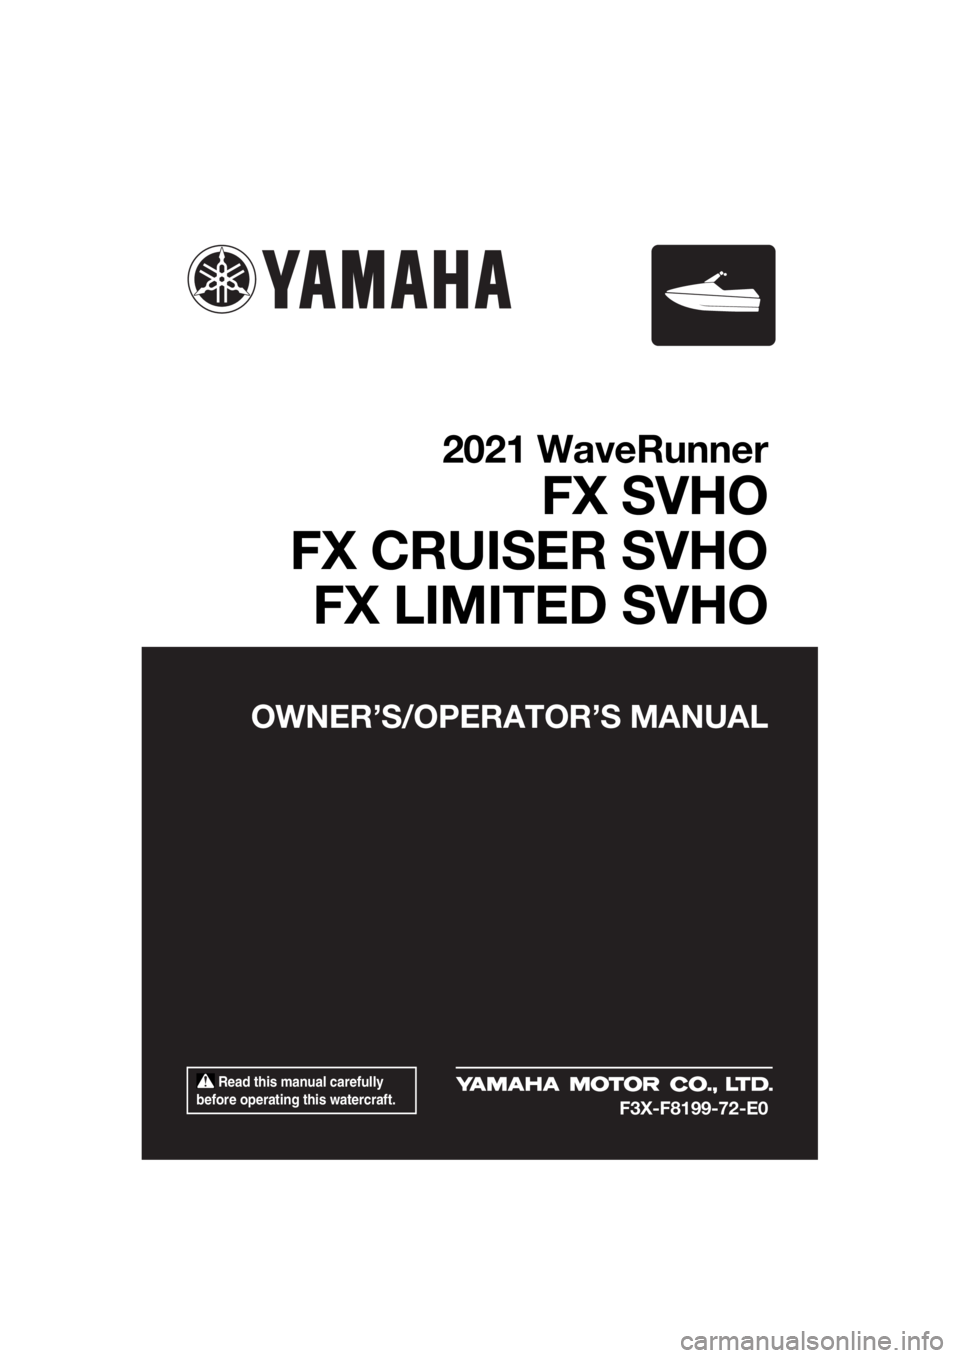 YAMAHA FX SVHO 2021  Owners Manual  Read this manual carefully 
before operating this watercraft.
OWNER’S/OPERAT OR’S MANUAL
2021 WaveRunner
FX SVHO
FX CRUISER SVHO FX LIMITED SVHO
F3X-F8199-72-E0
UF3X72E0.book  Page 1  Friday, May